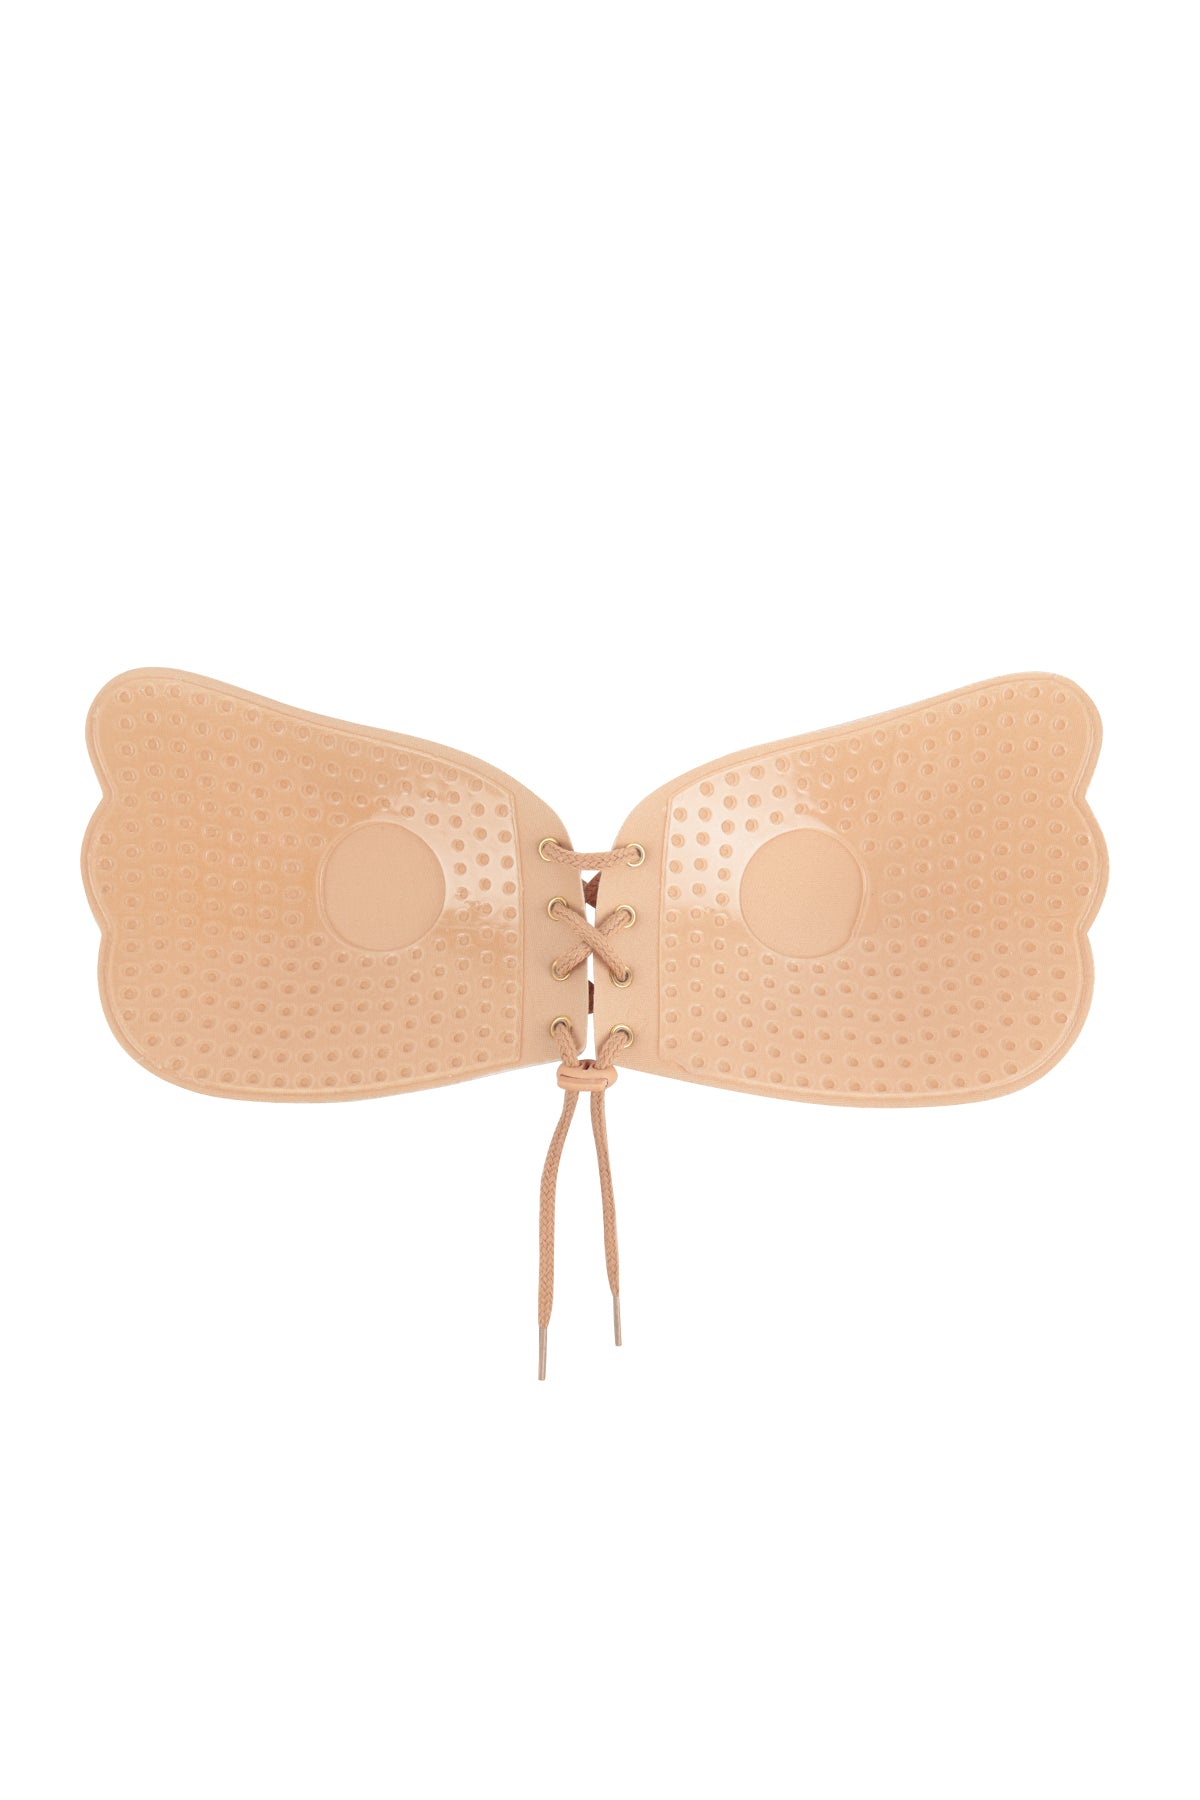 WING SHAPE ROPE PULL REUSABLE STRAPLESS NU BRA WITH NIPPLE TAPE